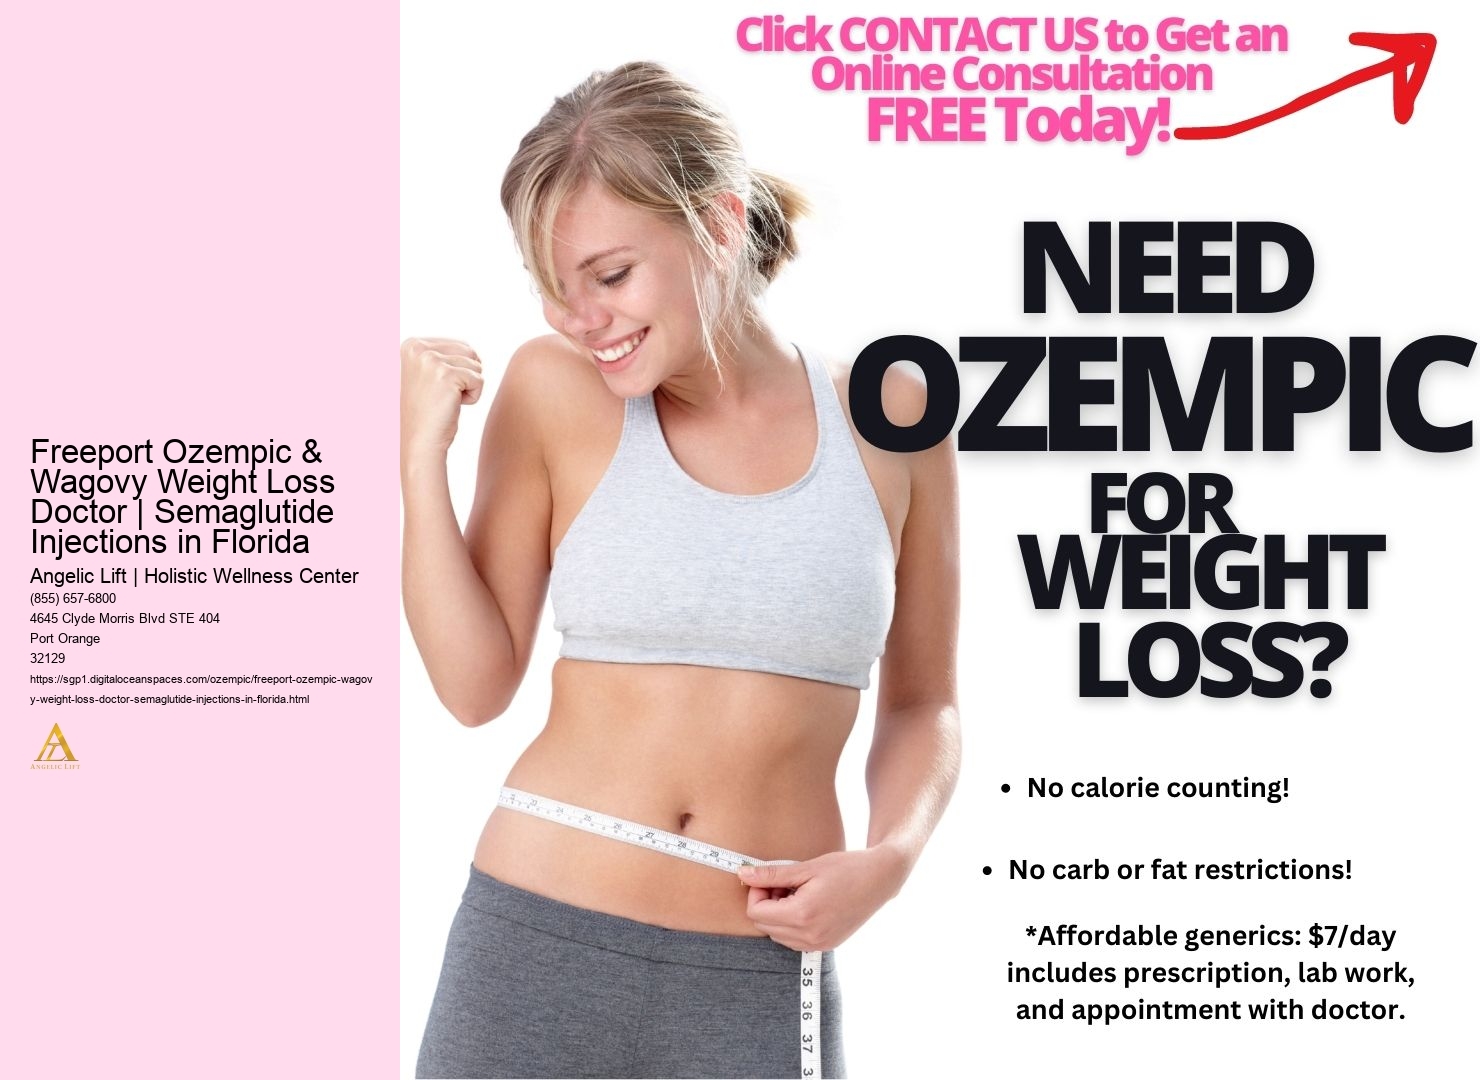 Freeport Ozempic & Wagovy Weight Loss Doctor | Semaglutide Injections in Florida